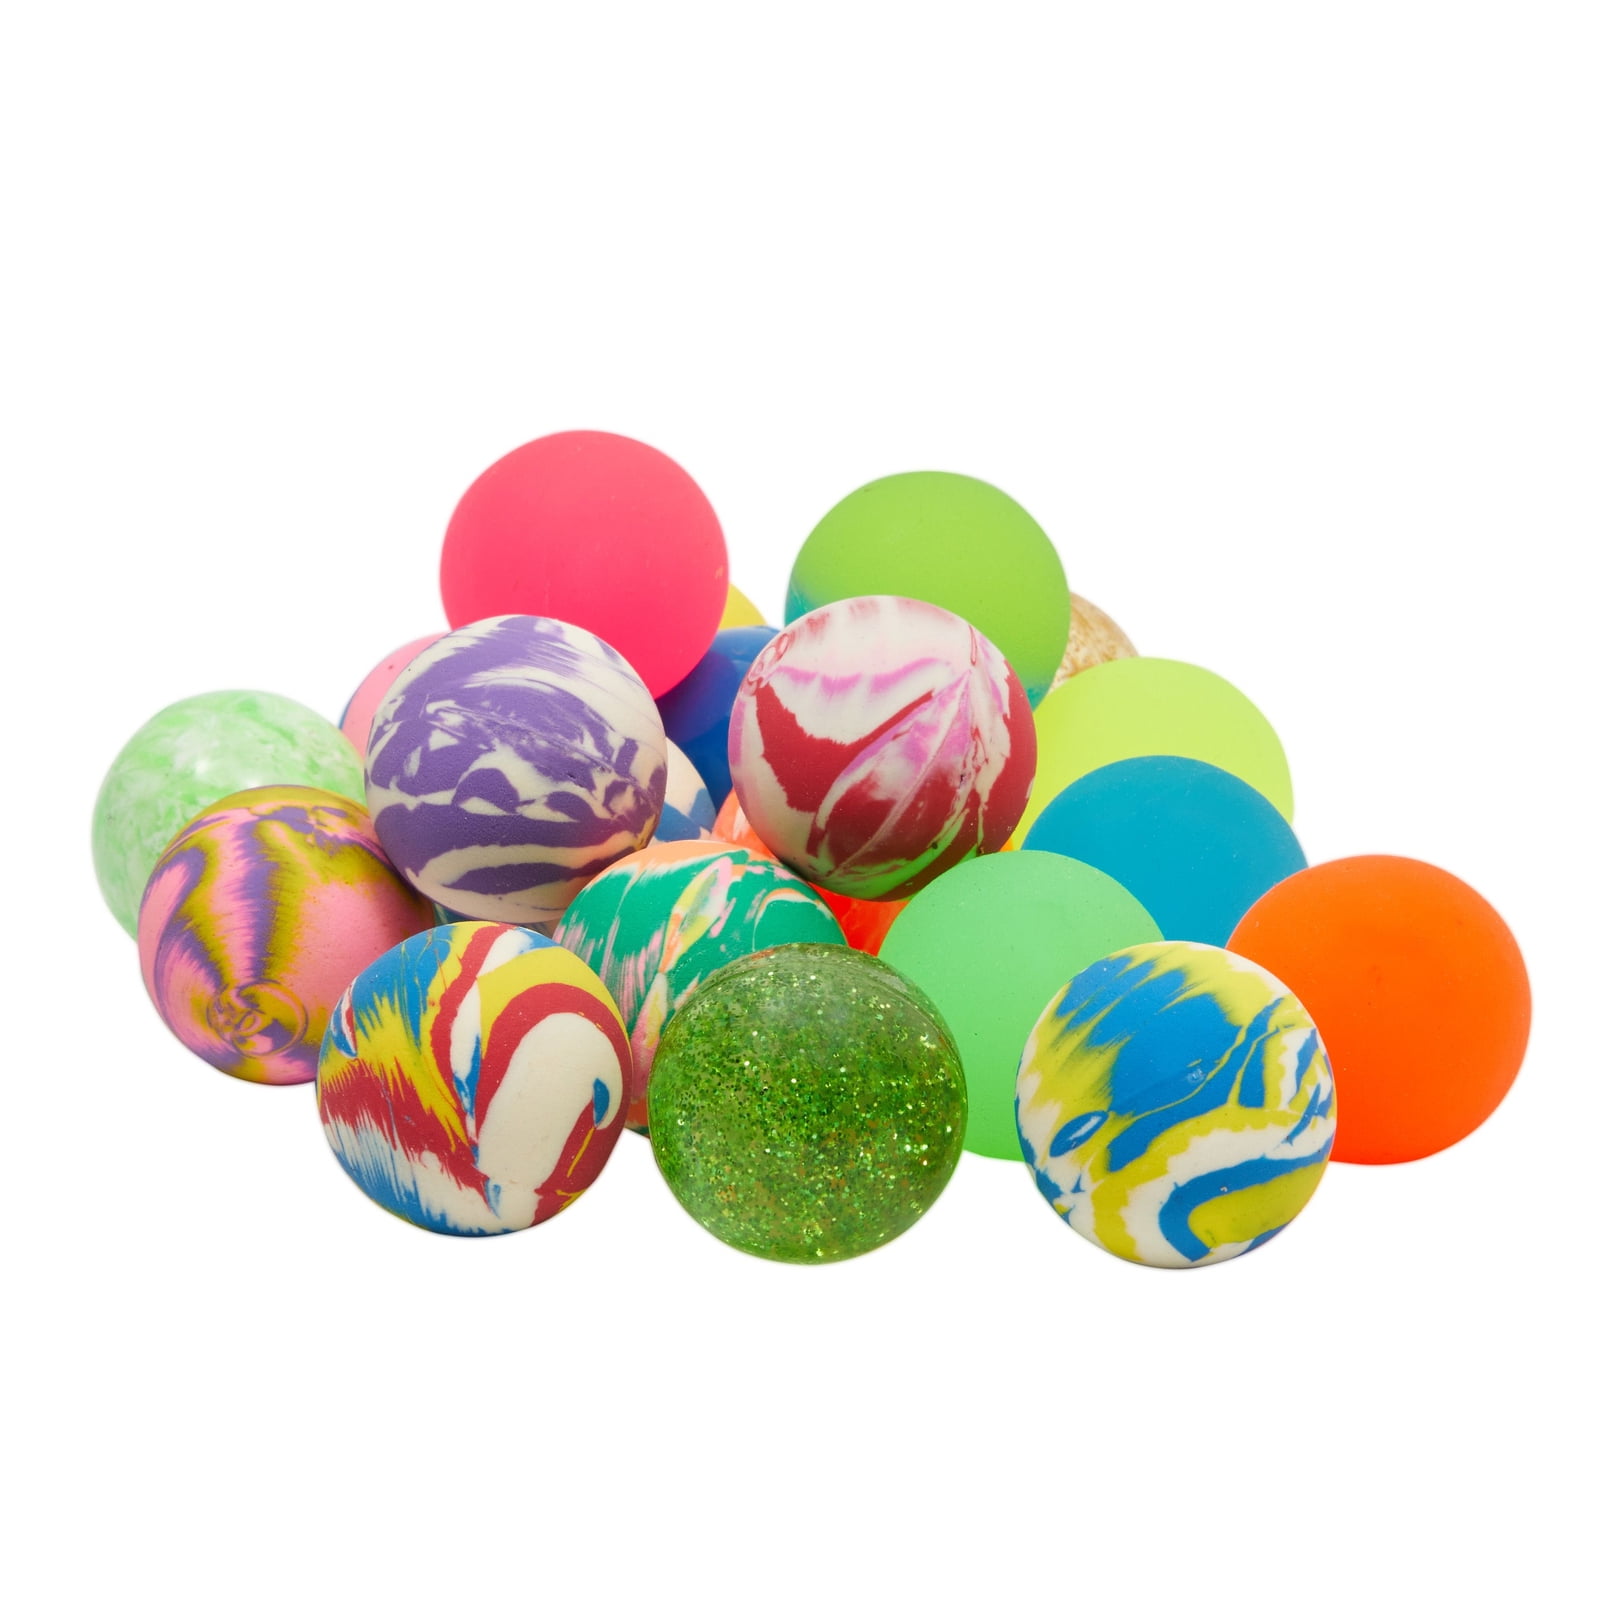 144 Icy 27mm Superballs High Bounce Bouncy Ball Balls Super Fast for sale online 